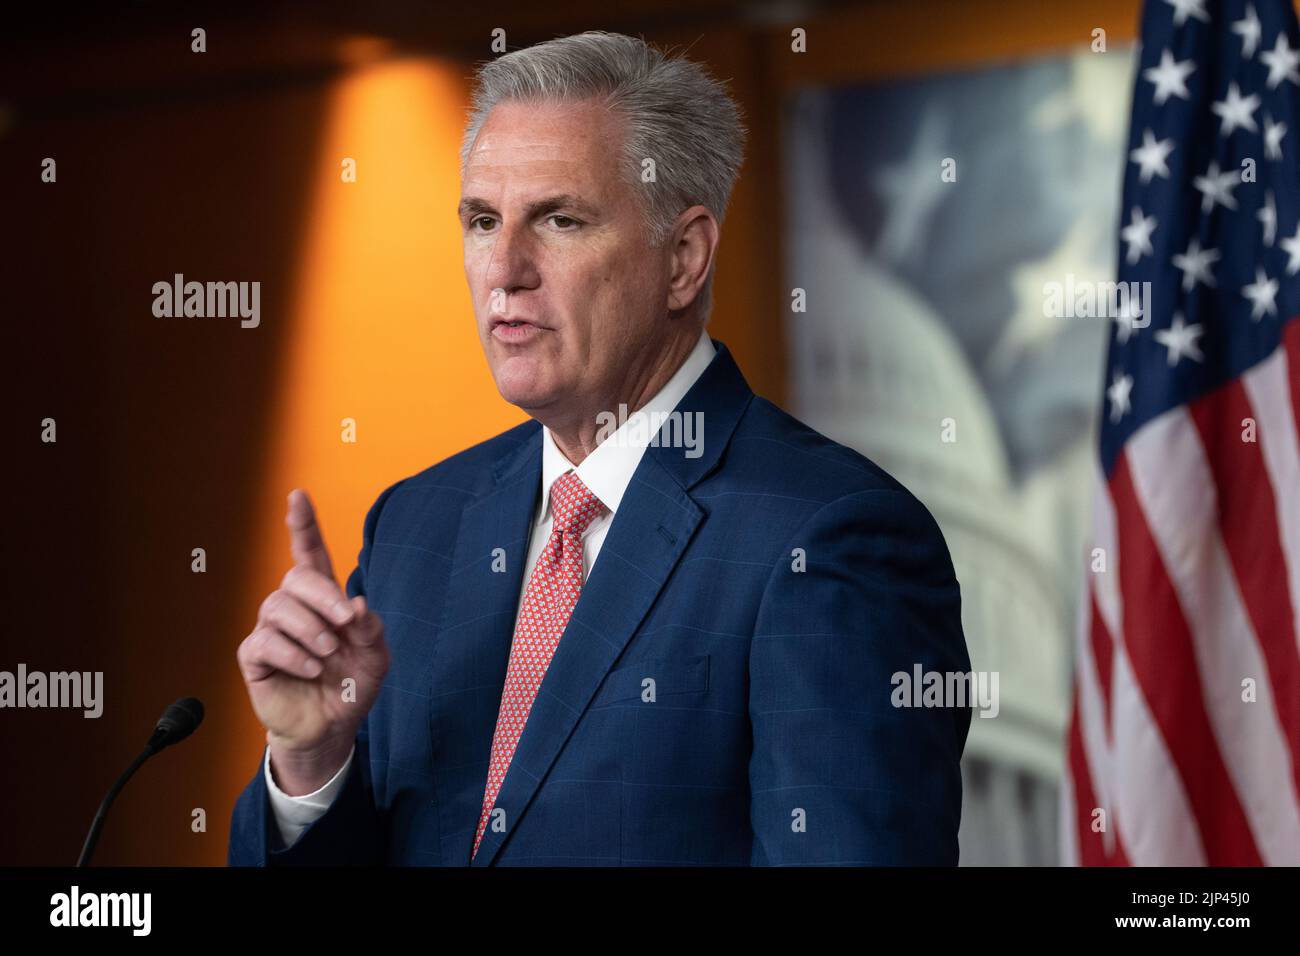 Washington, United States Of America. 29th July, 2022. United States House Minority Leader Kevin McCarthy (Republican of California) holds a news conference on Capitol Hill in Washington, DC, Friday, July 29, 2022. Credit: Chris Kleponis/CNP/AdMedia/Newscom/Alamy Live News Stock Photo